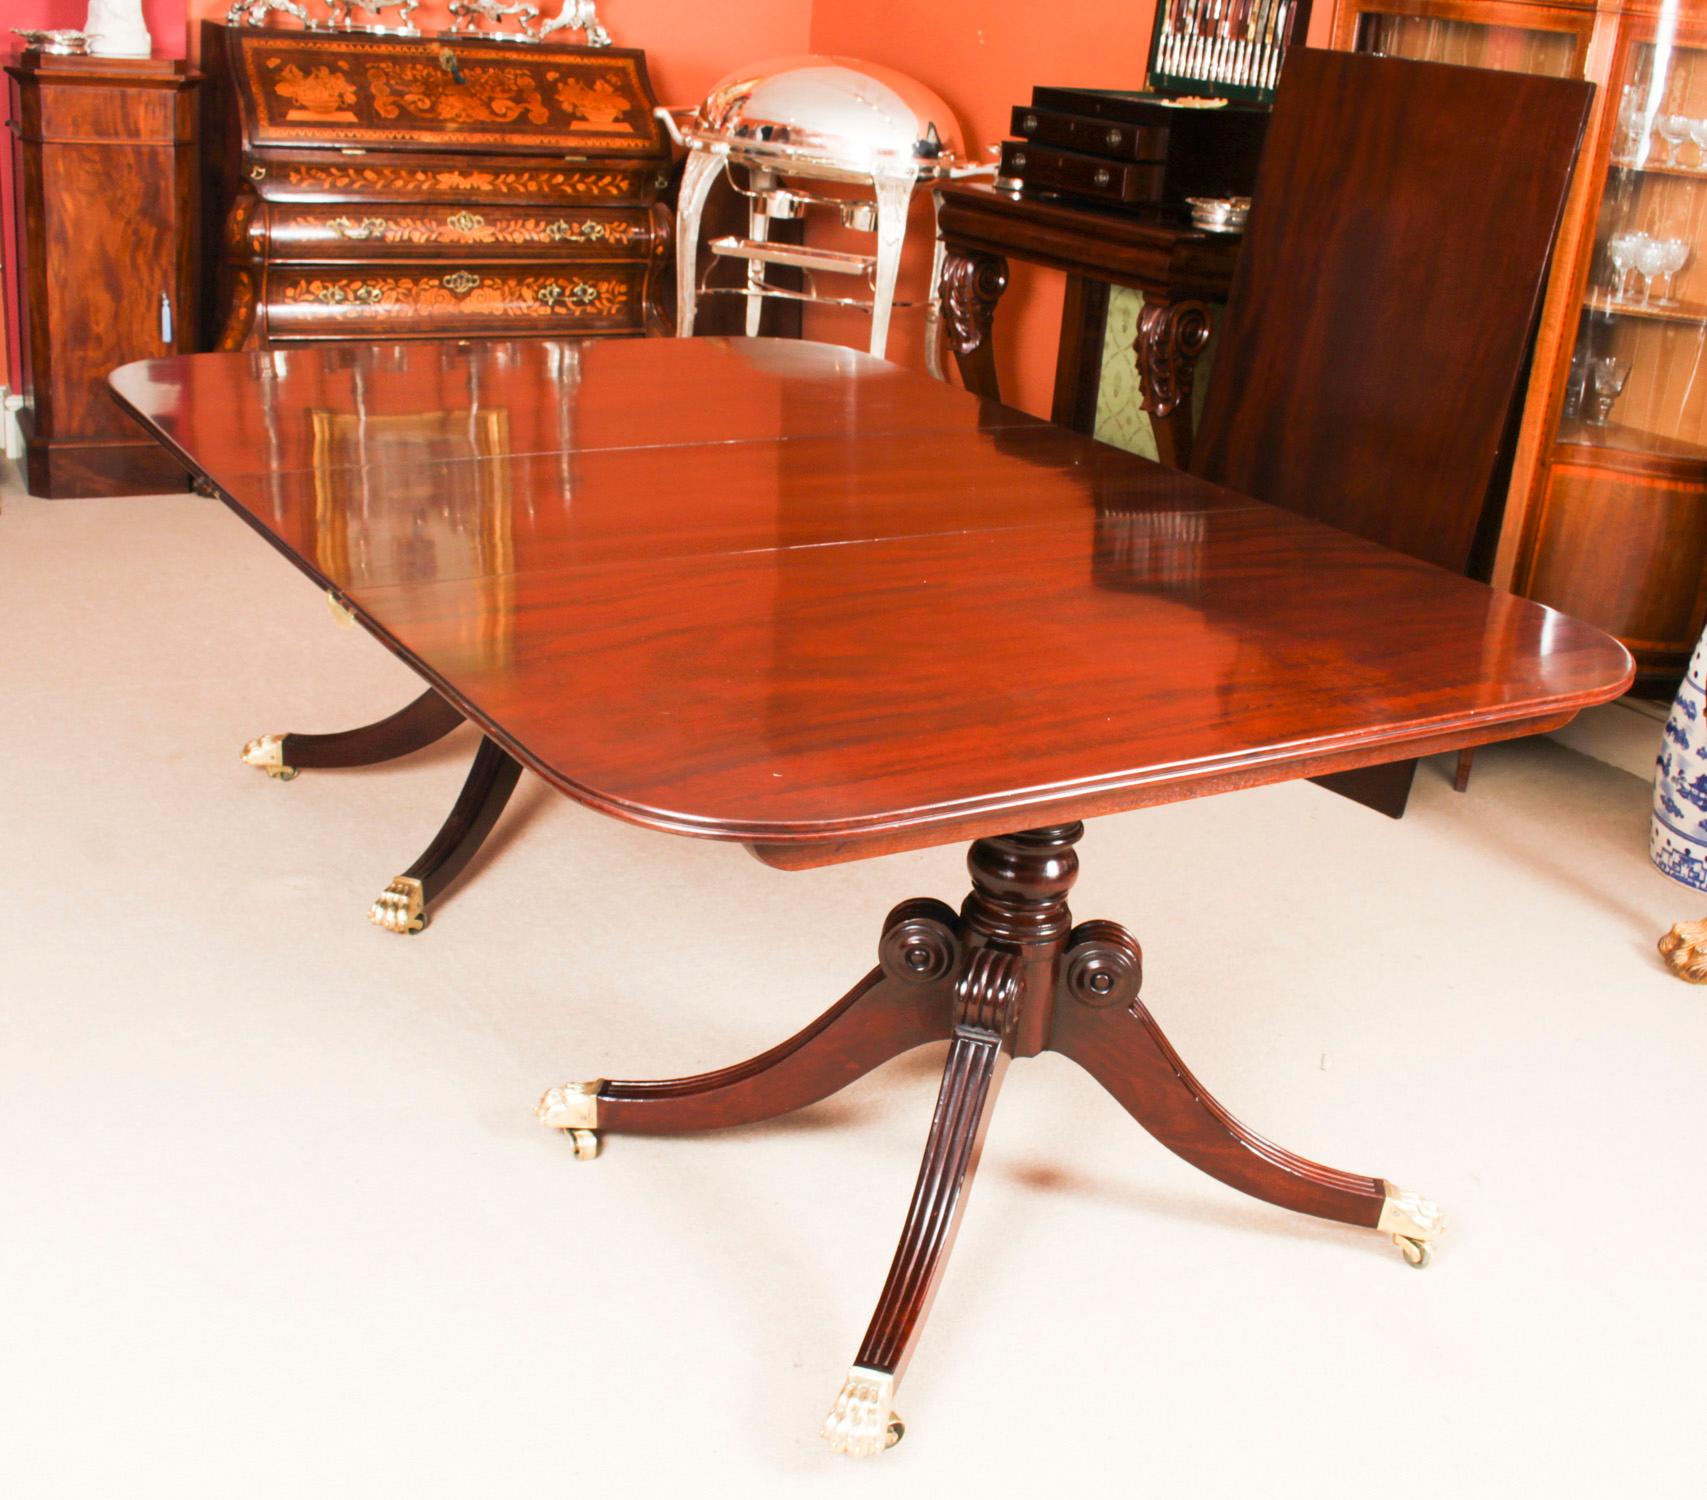 Early 19th Century Antique Twin Pillar Regency Dining Table & 8 Regency Chairs 19th Century